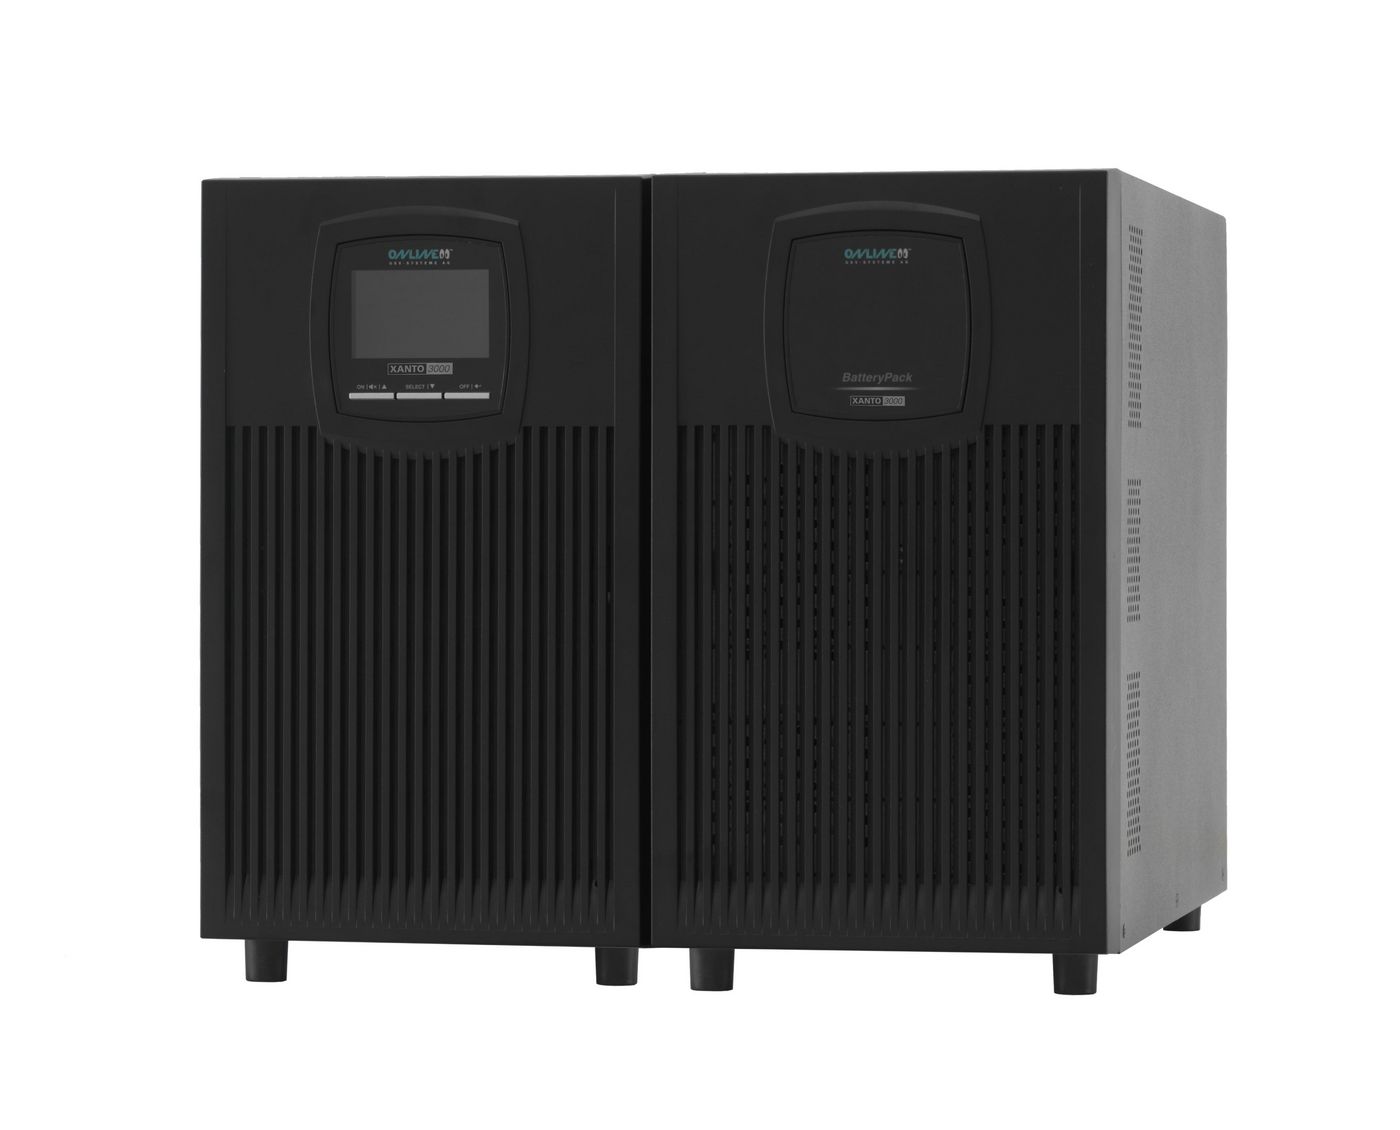 Online-USV-Systeme X3000BP W128302471 Ups Battery Cabinet Tower 